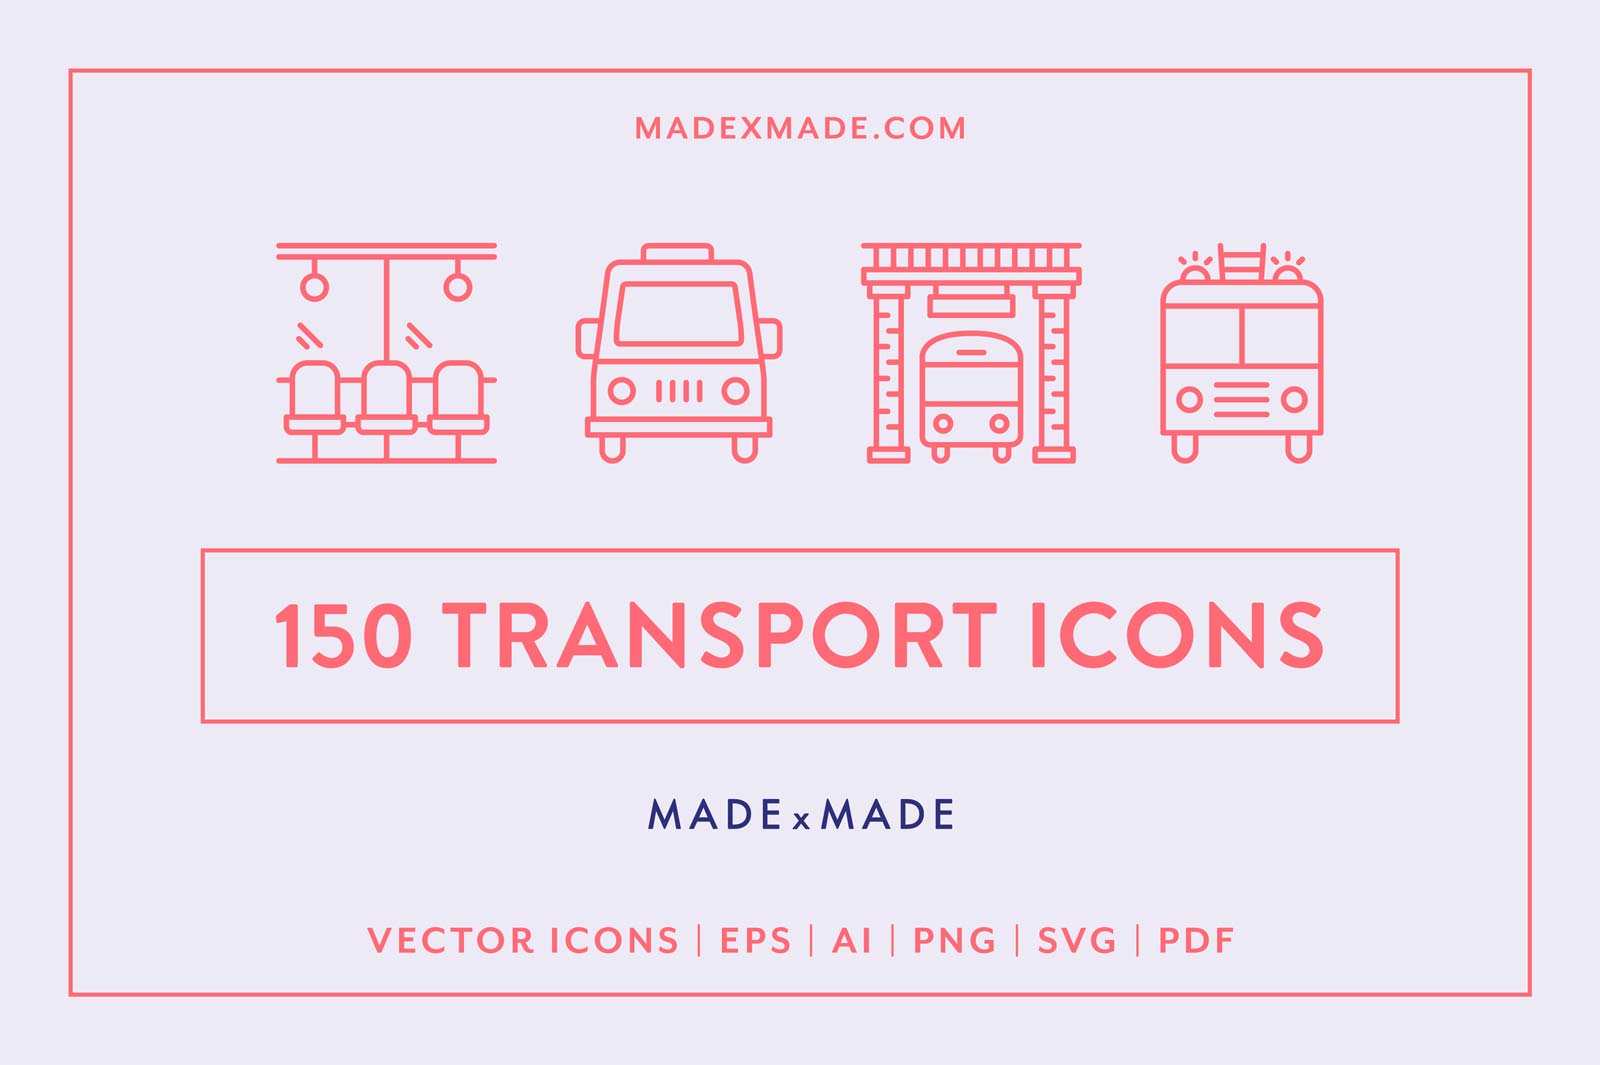 made x made icons transport